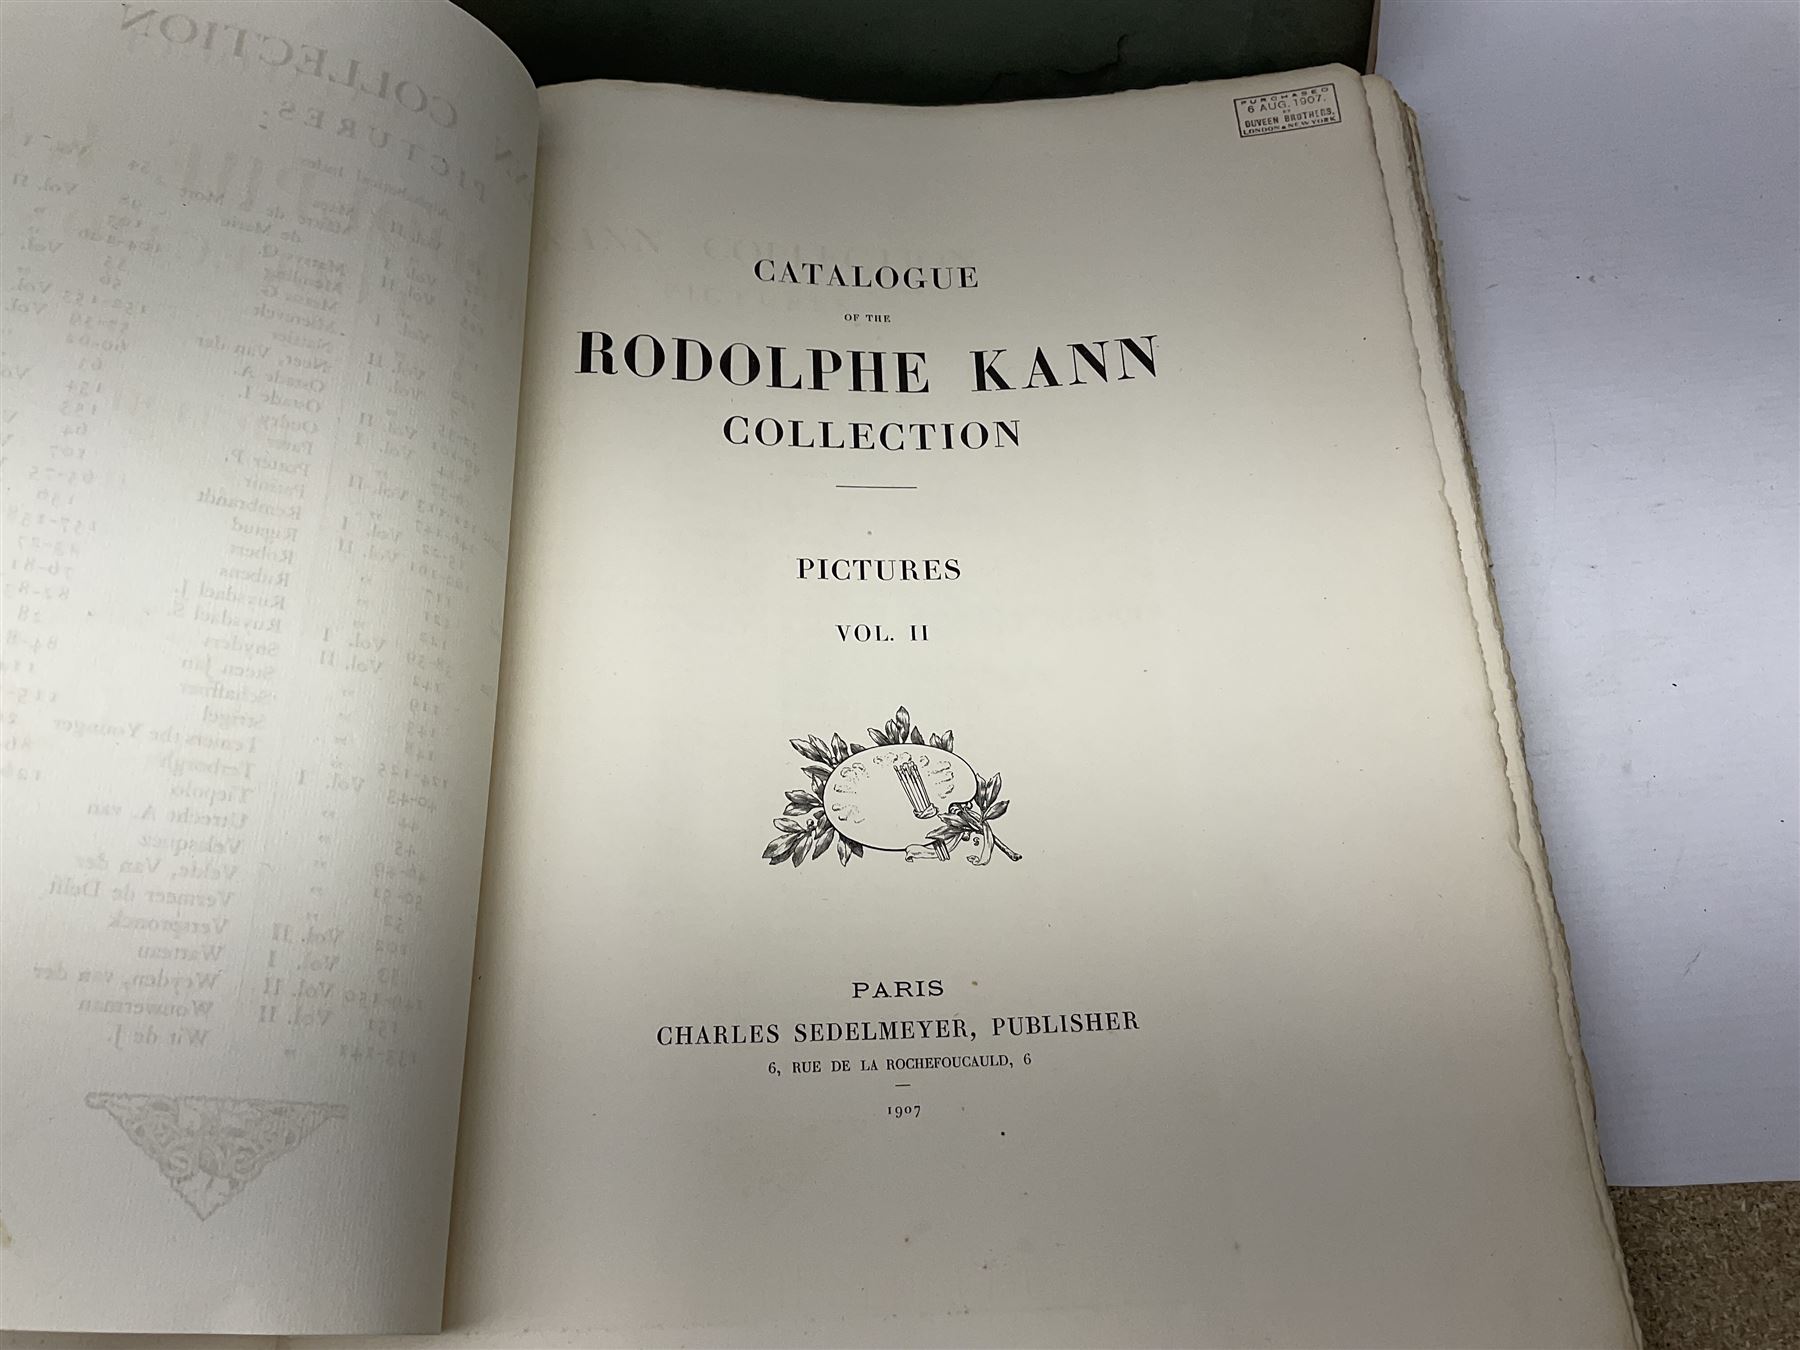 The R. Kann Collection - Image 9 of 20